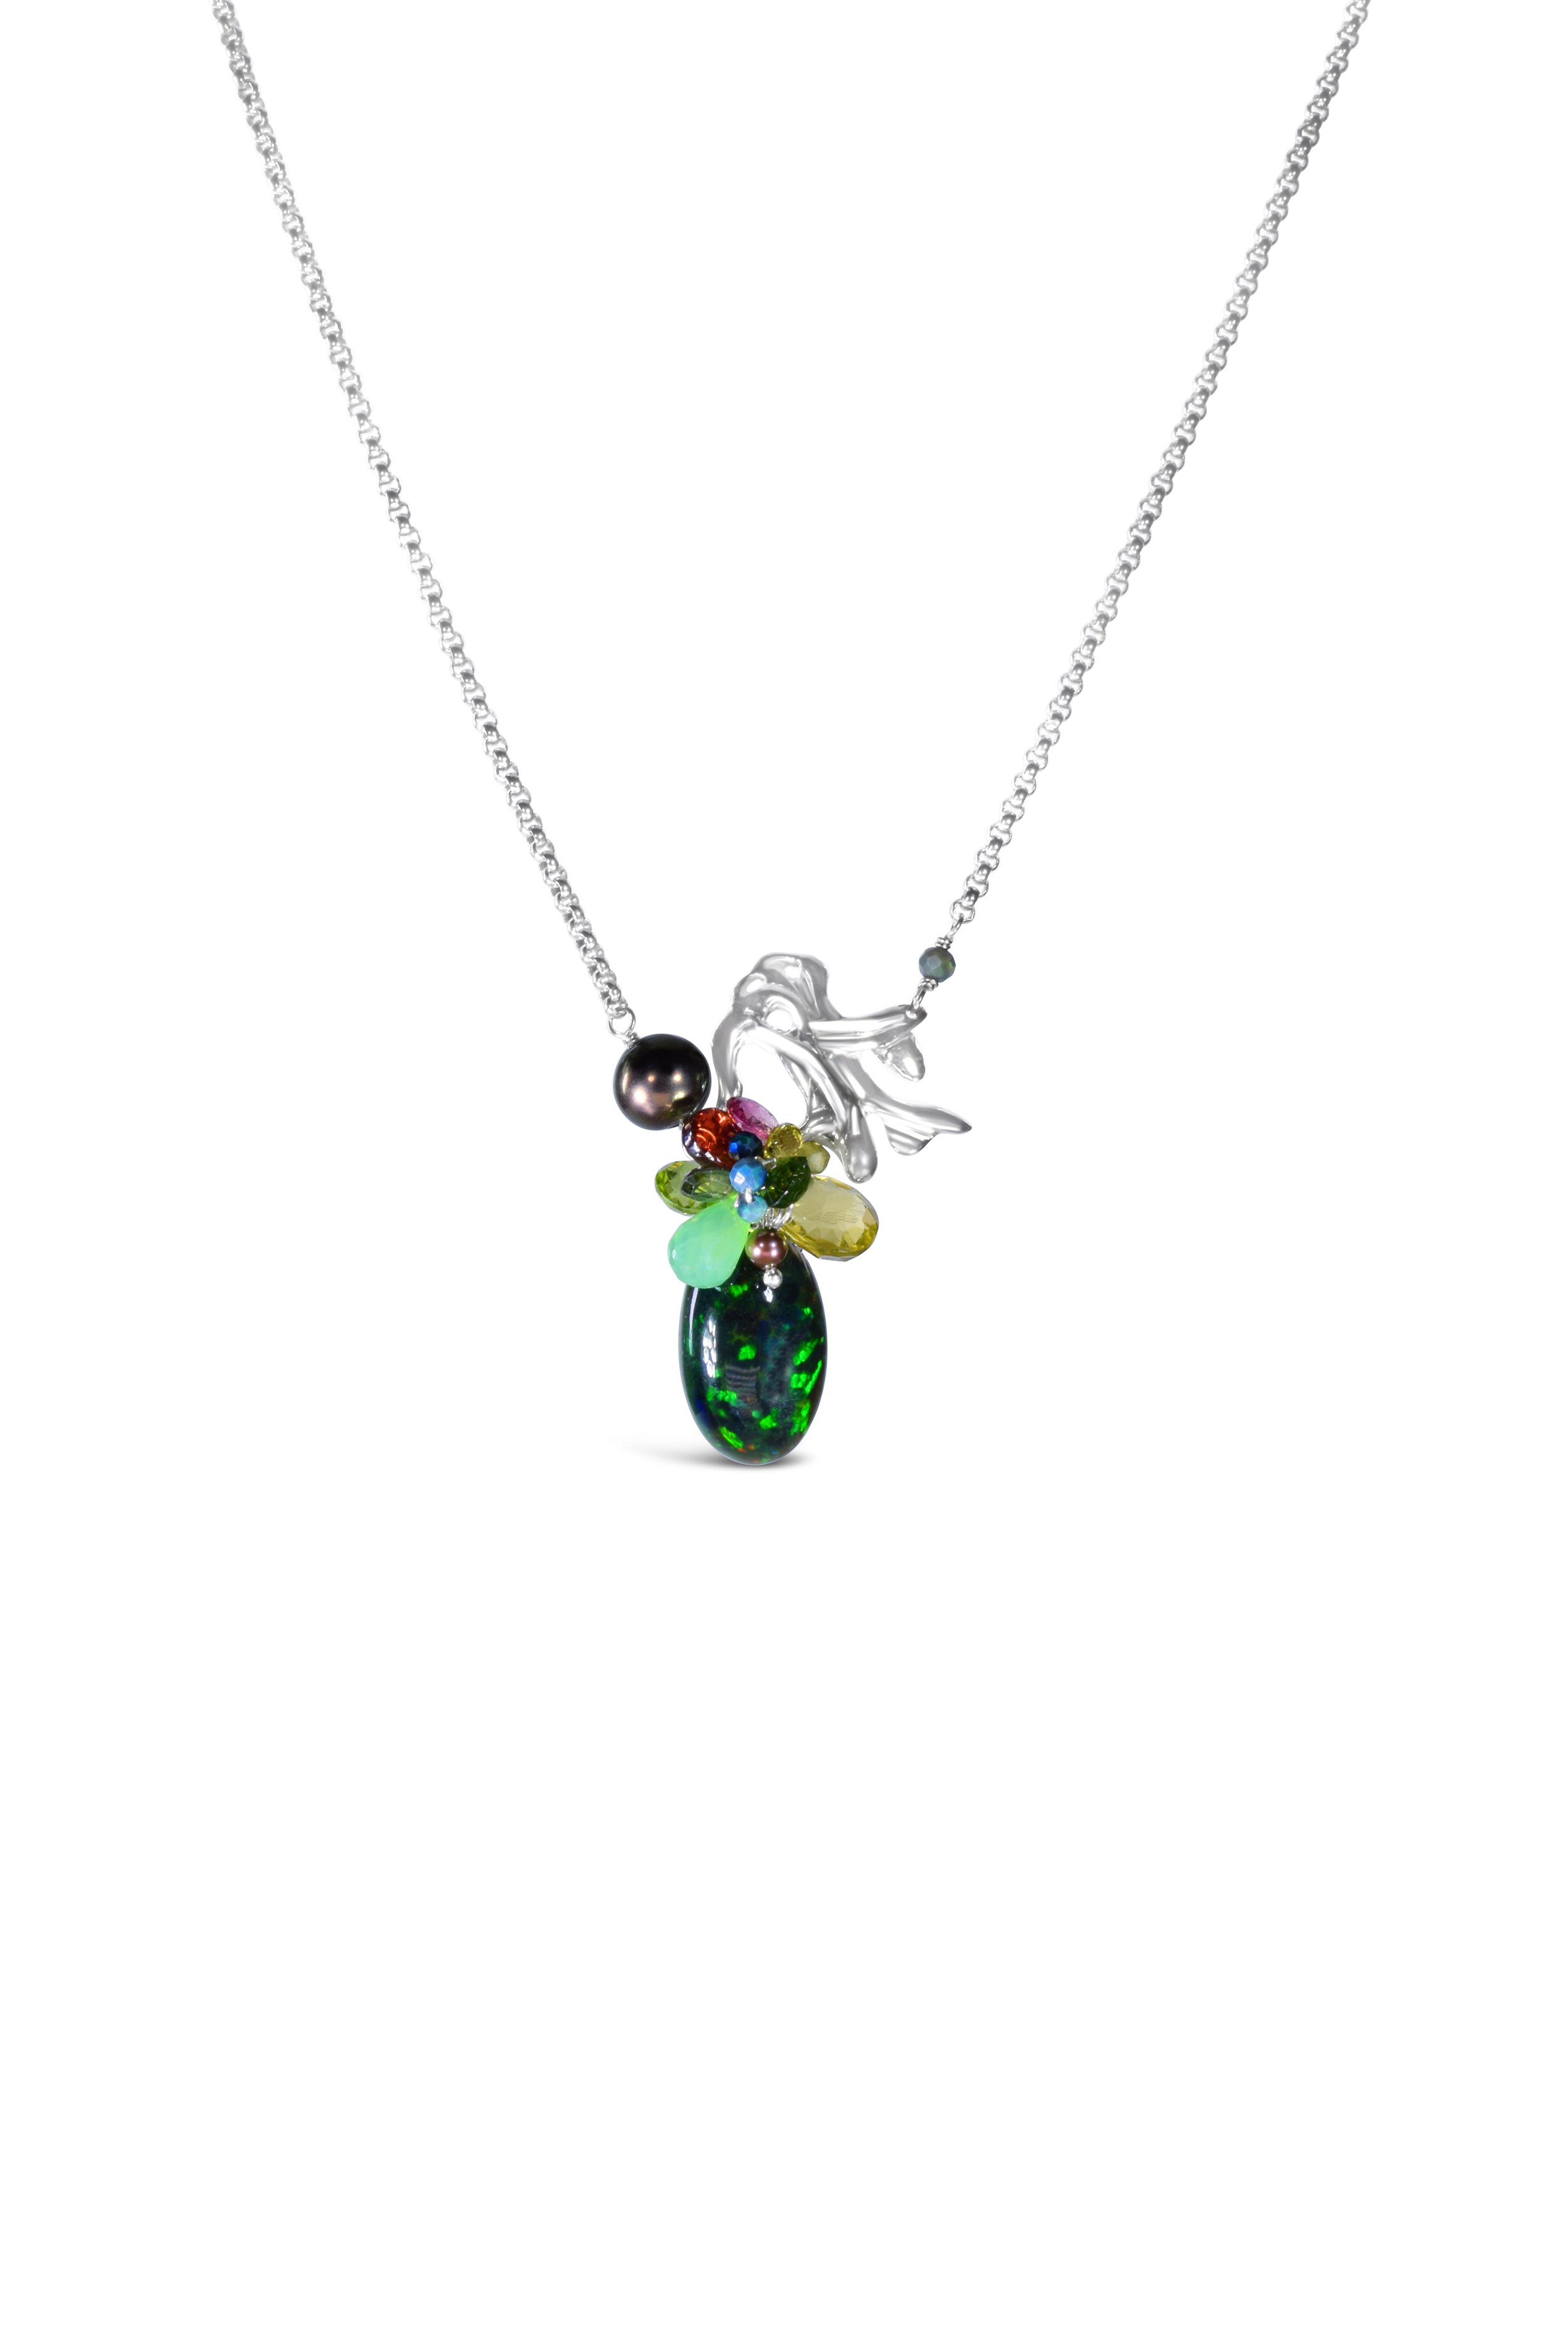 Black opal and 14k white gold necklace